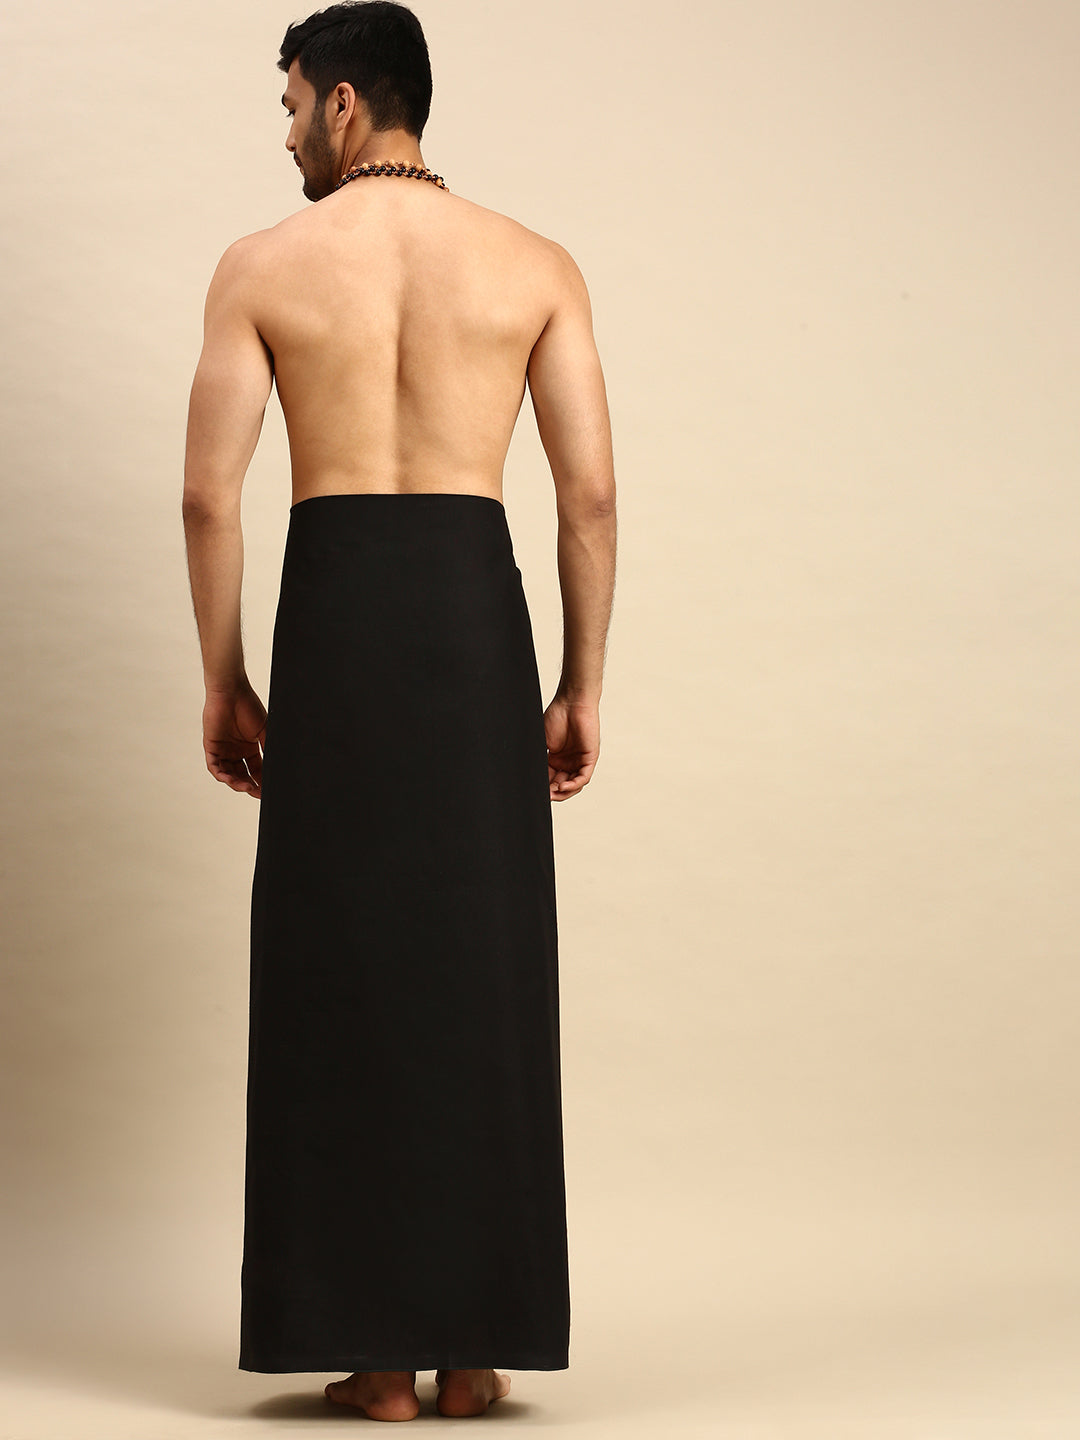 Mens Devotional Dhoti With Small Border Sudhan Black-Back view